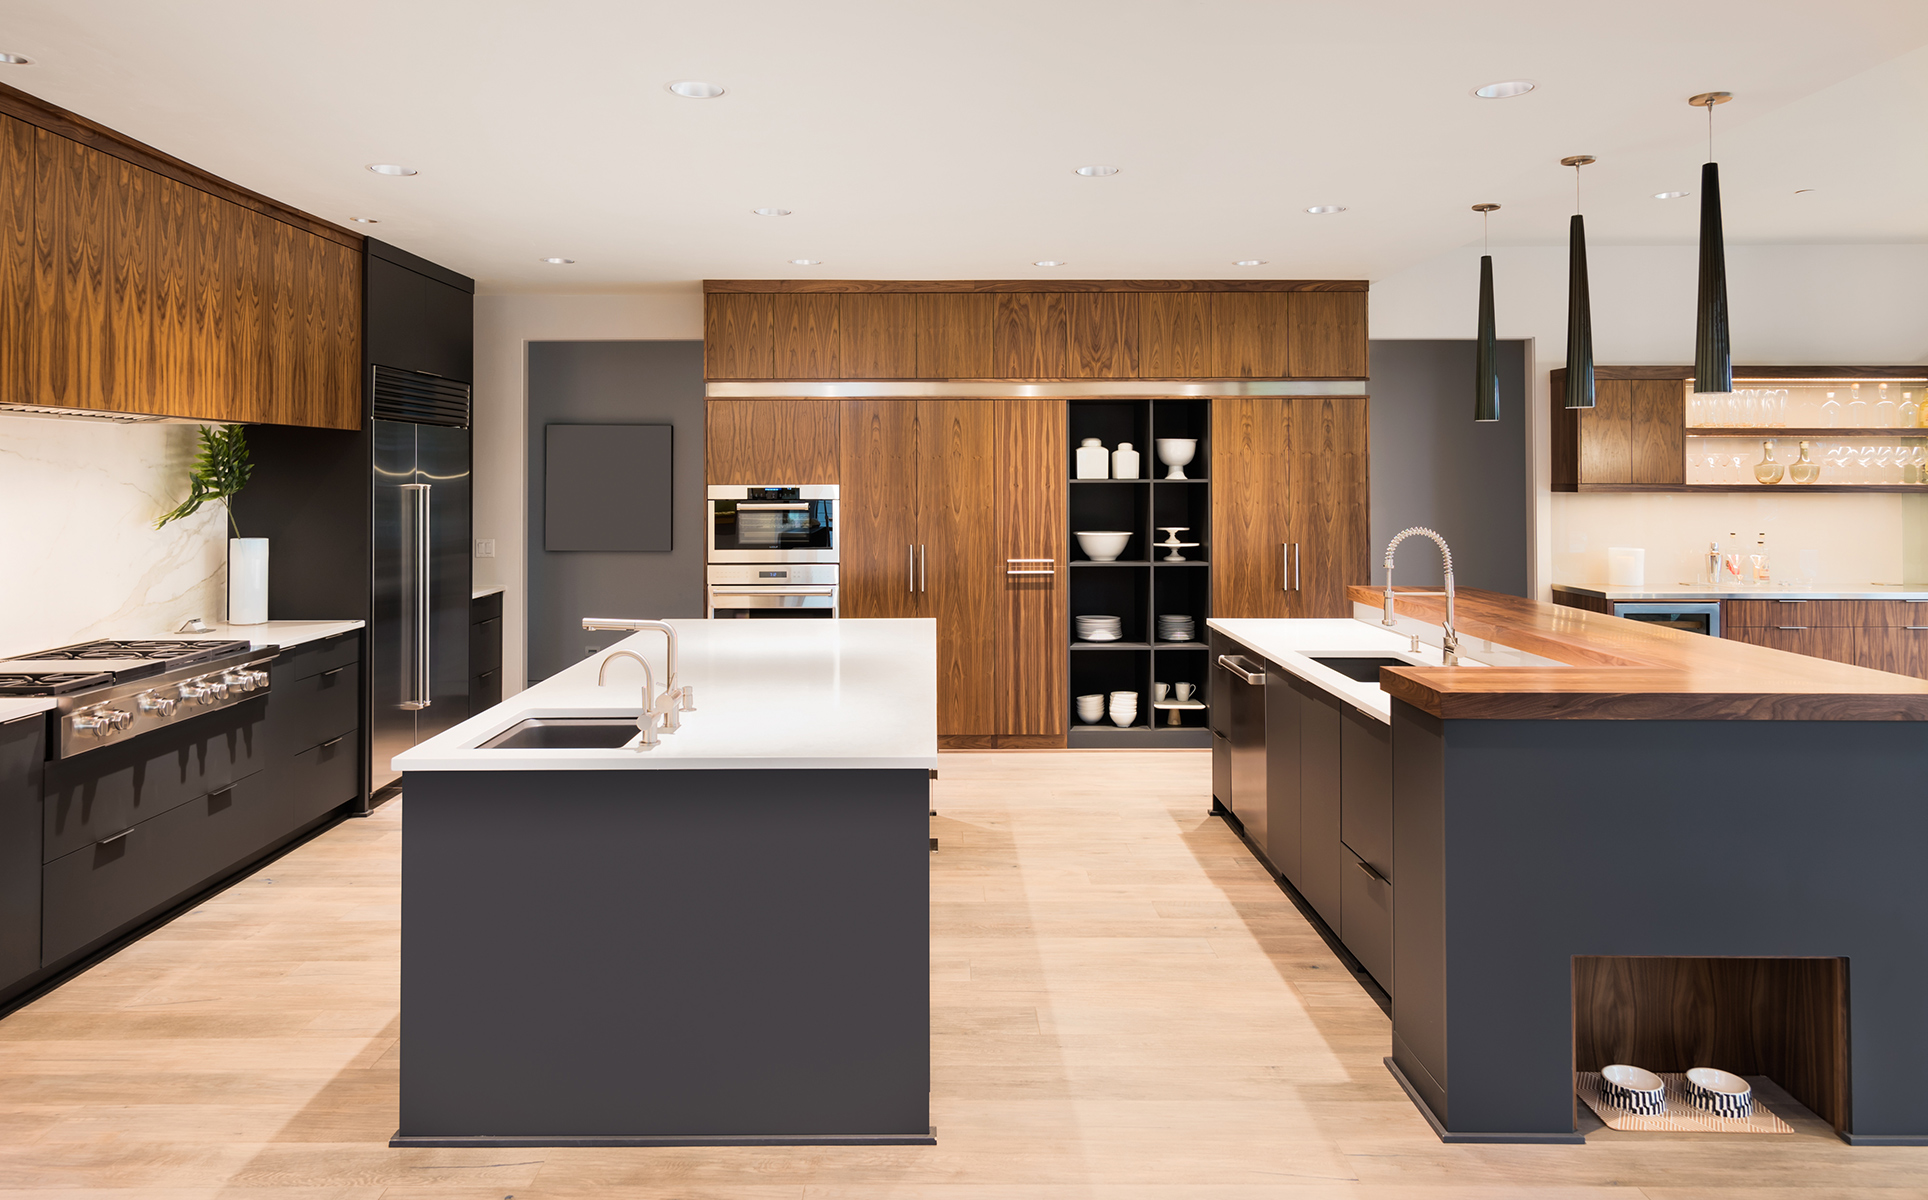 Two island trend in kitchens